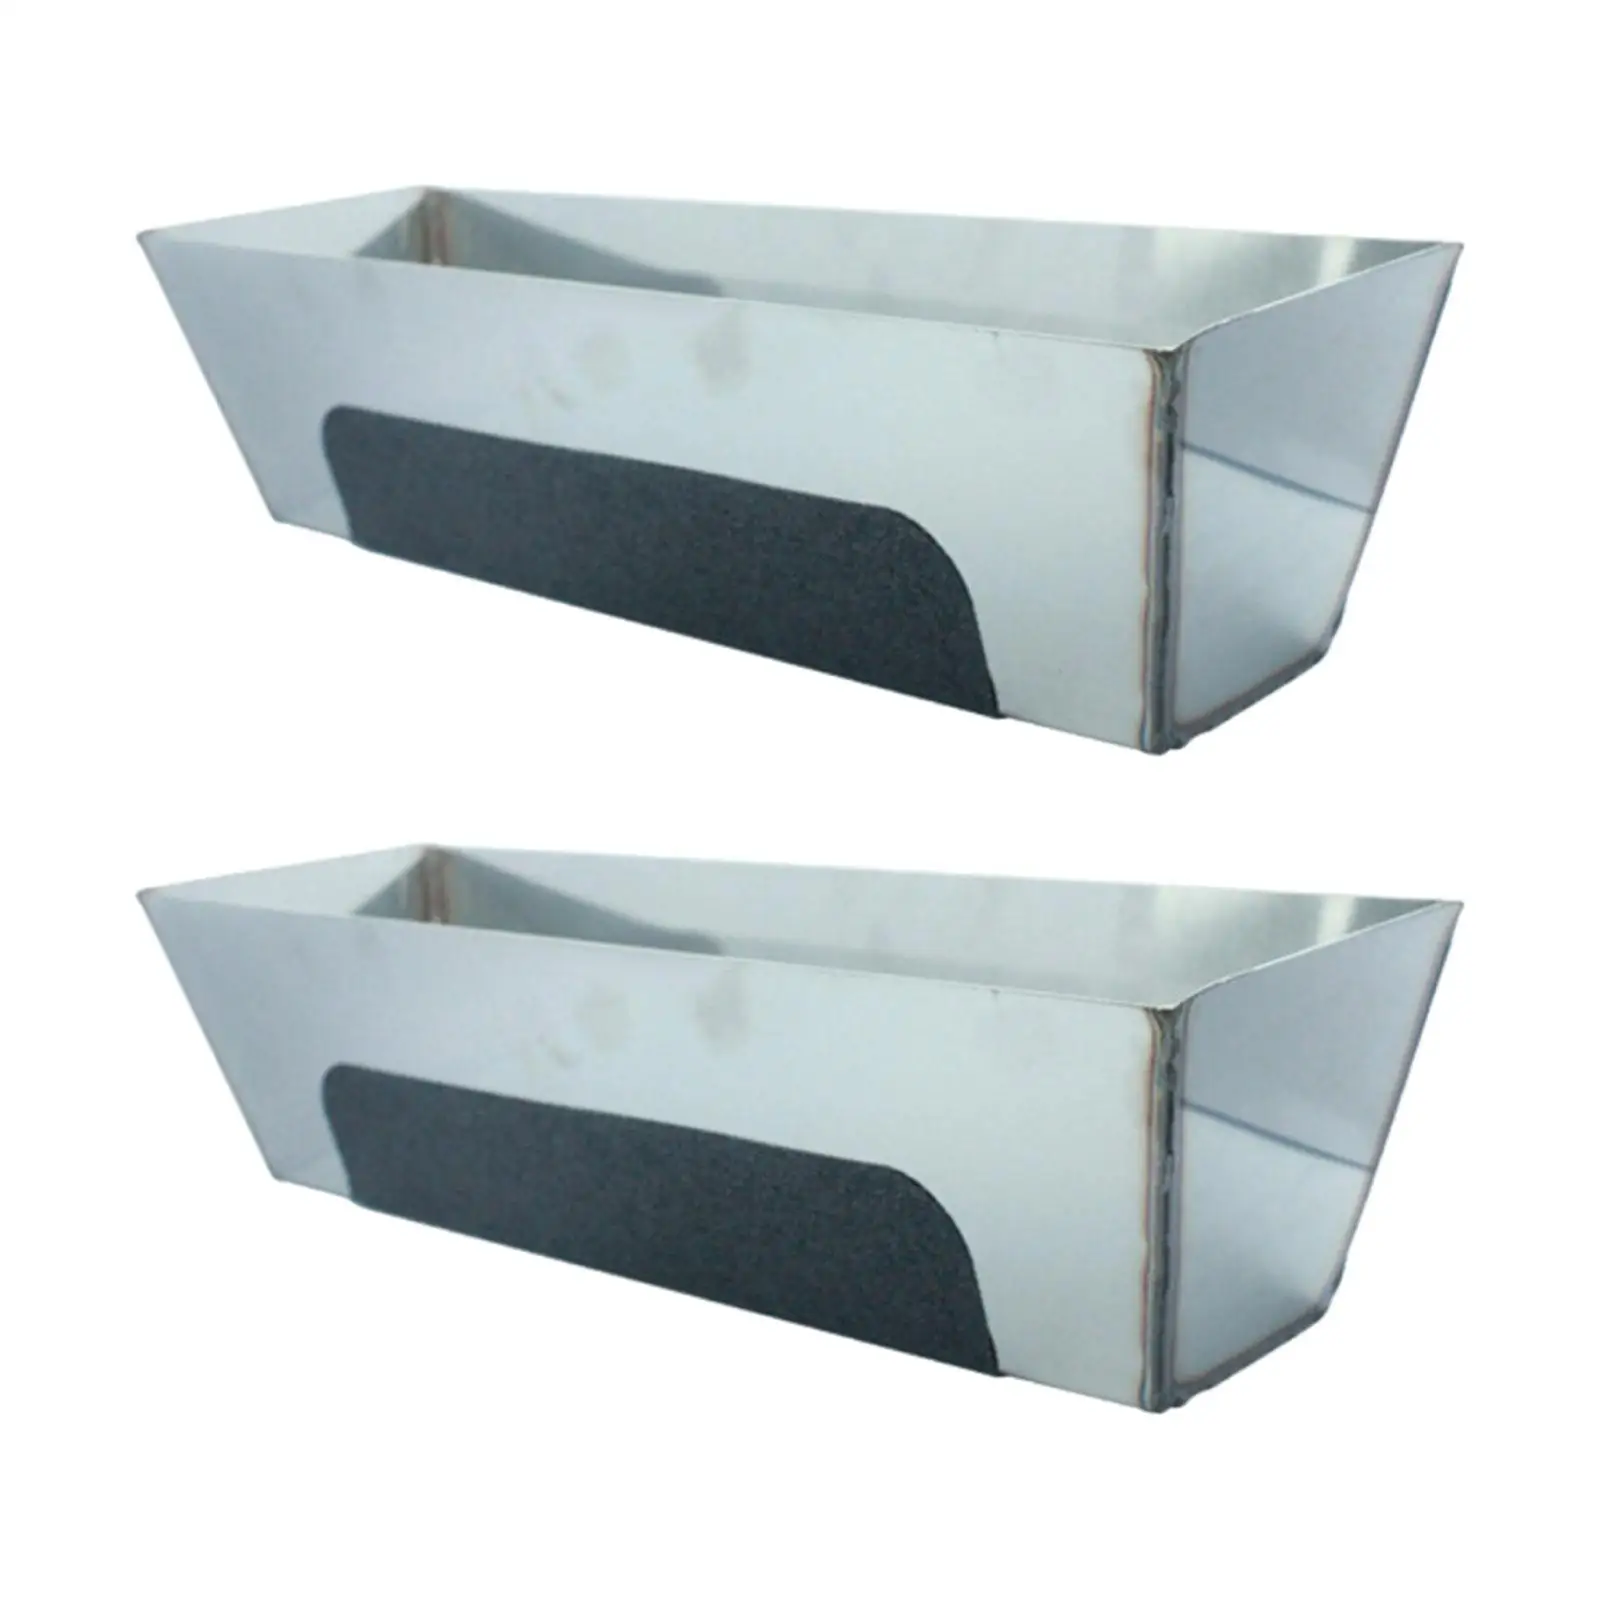 Stainless Steel Mud Pan Bucket Durable Lightweight Sheared Sides Tool Plastering Plasterers Scraping Bar for Easy Knife Cleaning